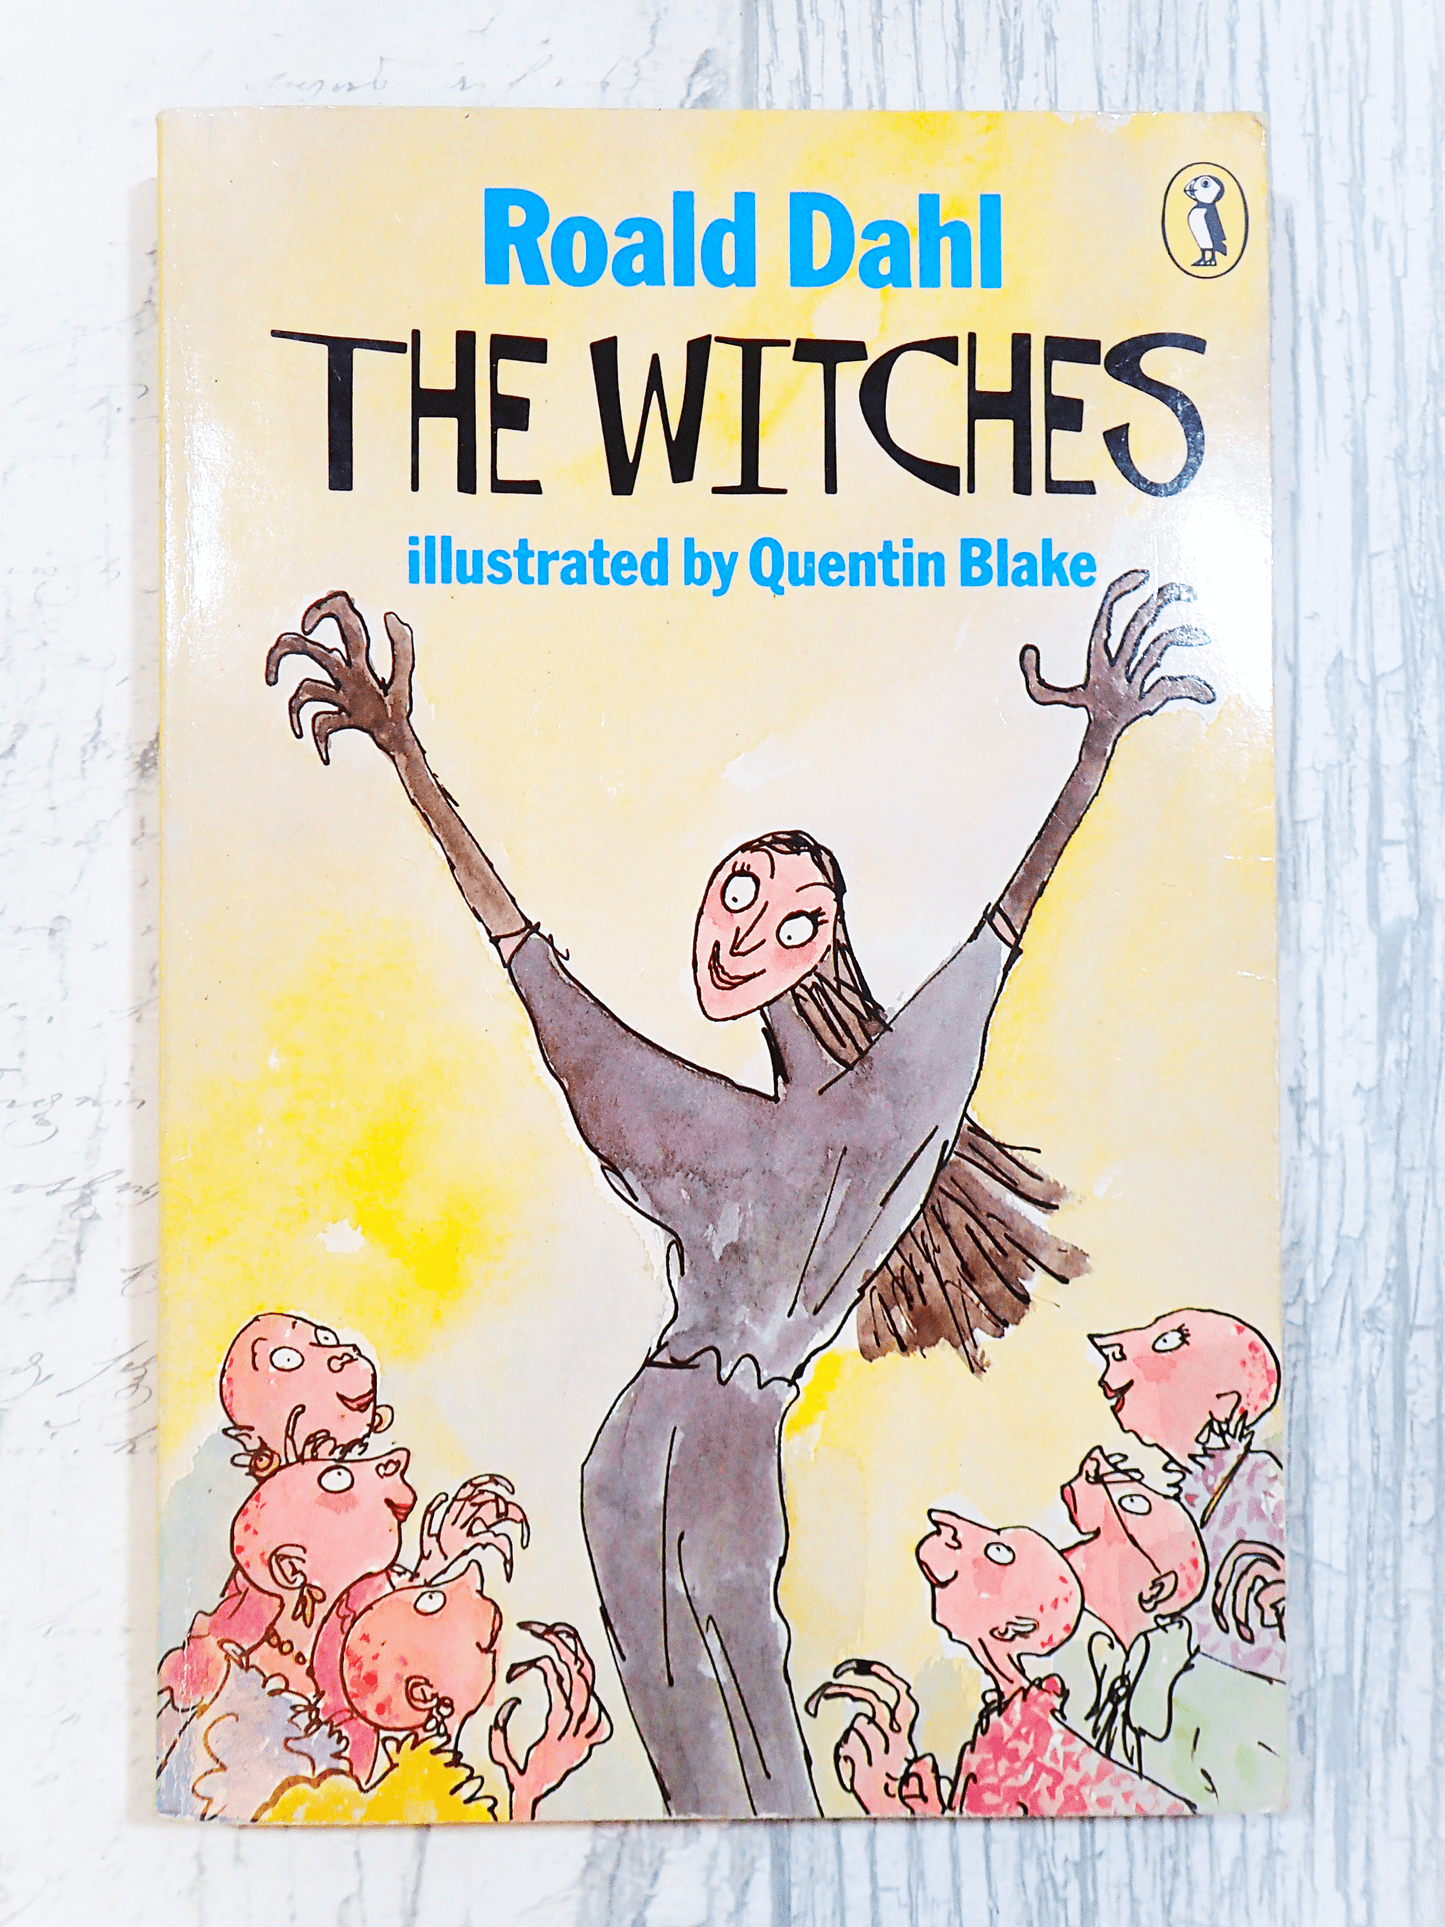 Cover of Vintage Puffin Paperback Roald Dahl 'The Witches' showing a witch with arms raised and titles in blue and black with puffin logo against a light background. 